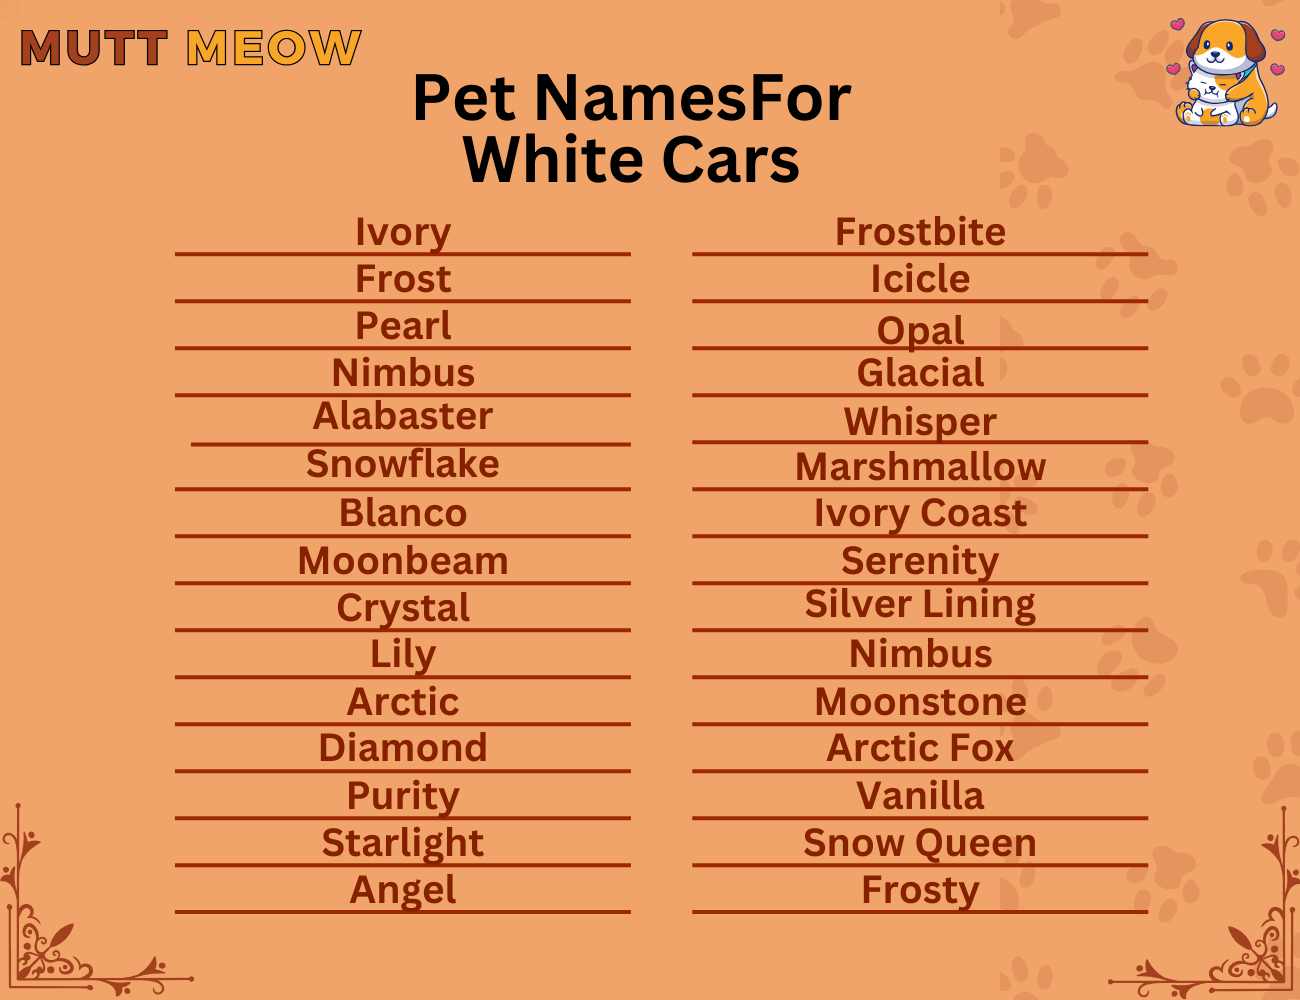 Pet Names For White Cars